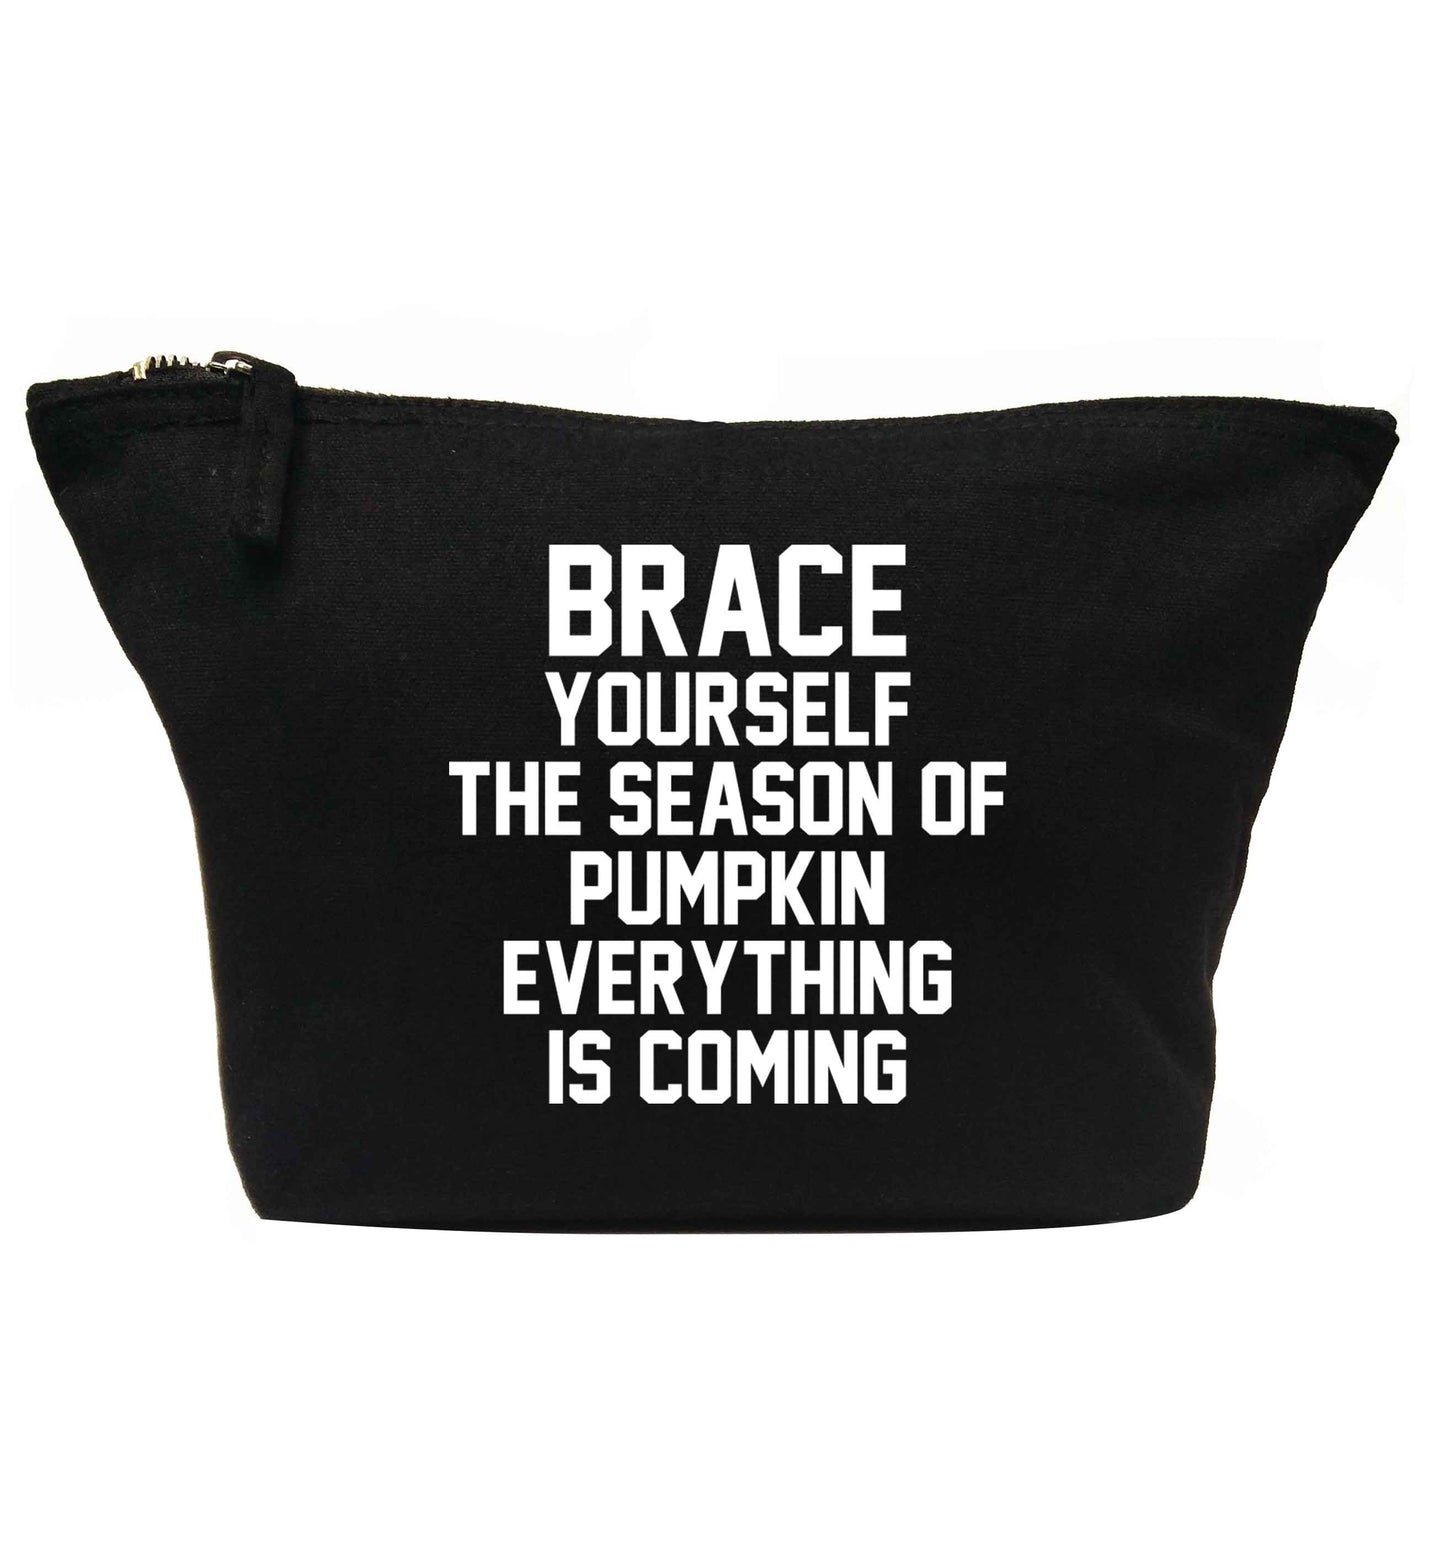 Brace yourself the season of pumpkin everything is coming | Makeup / wash bag